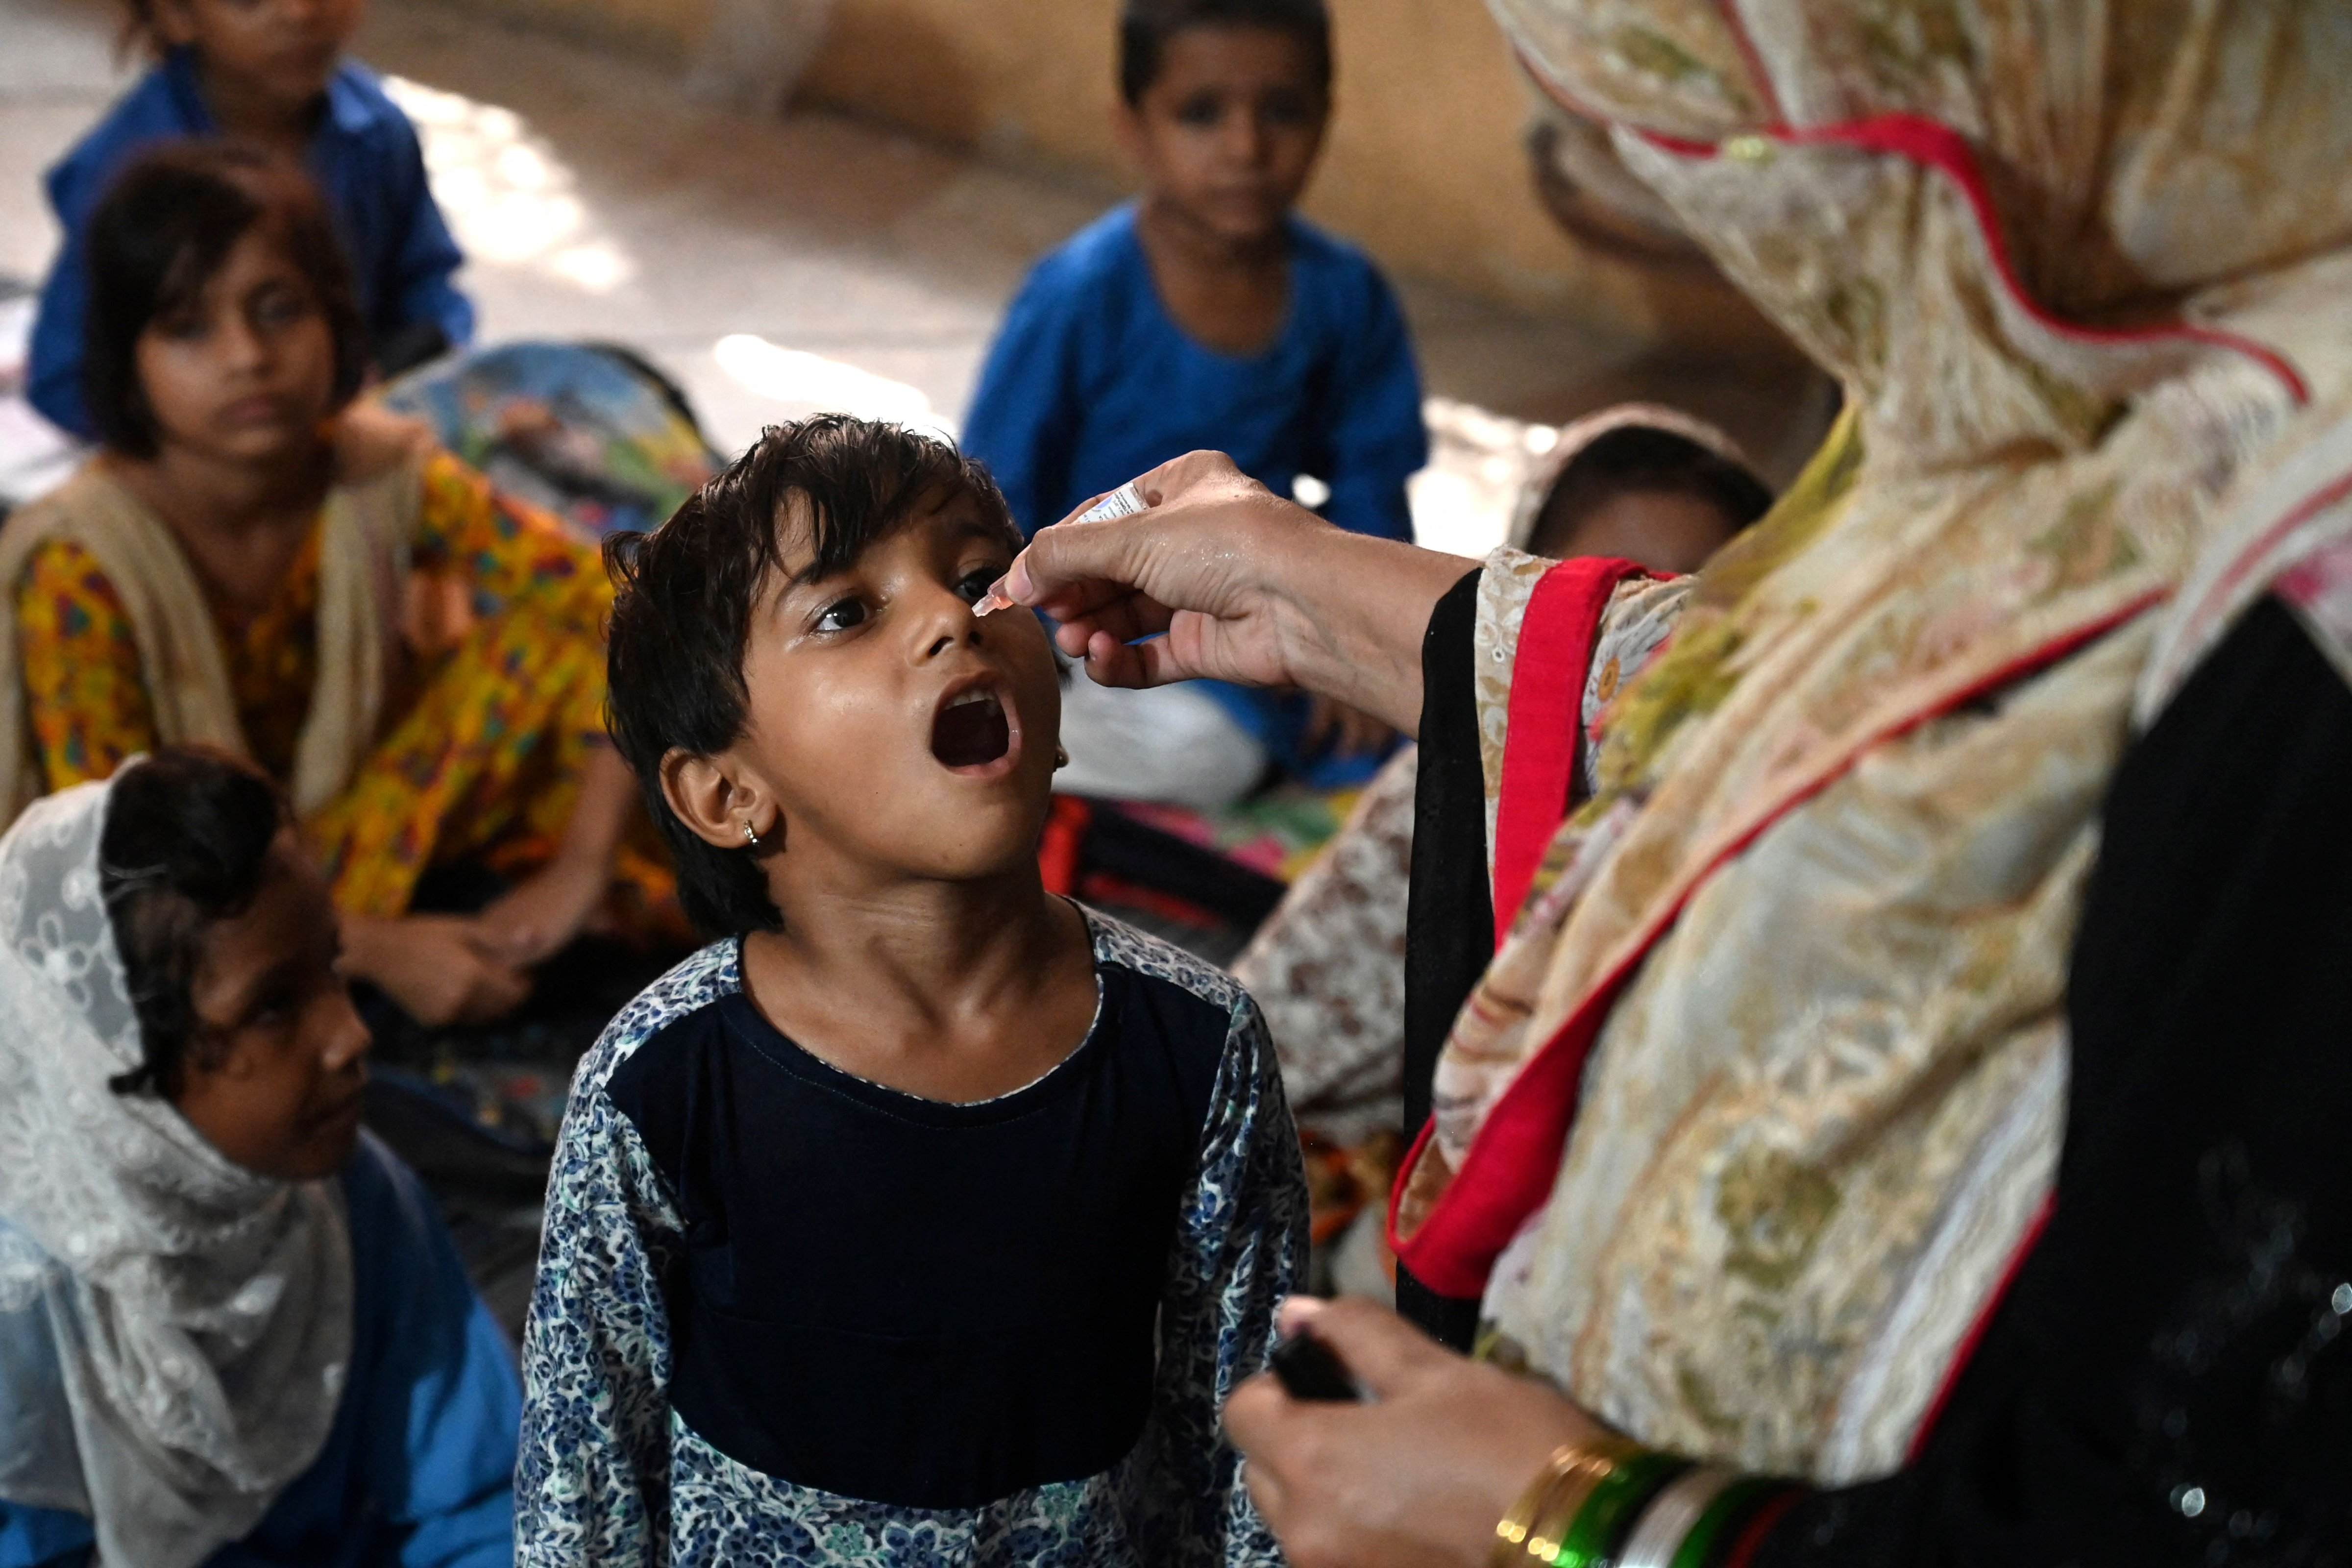 A health worker administers polio vaccine drops to a child at a school during a door-to-door polio vaccination campaign in Lahore, Pakistan on August 22, 2022. (AFP via Getty Images)